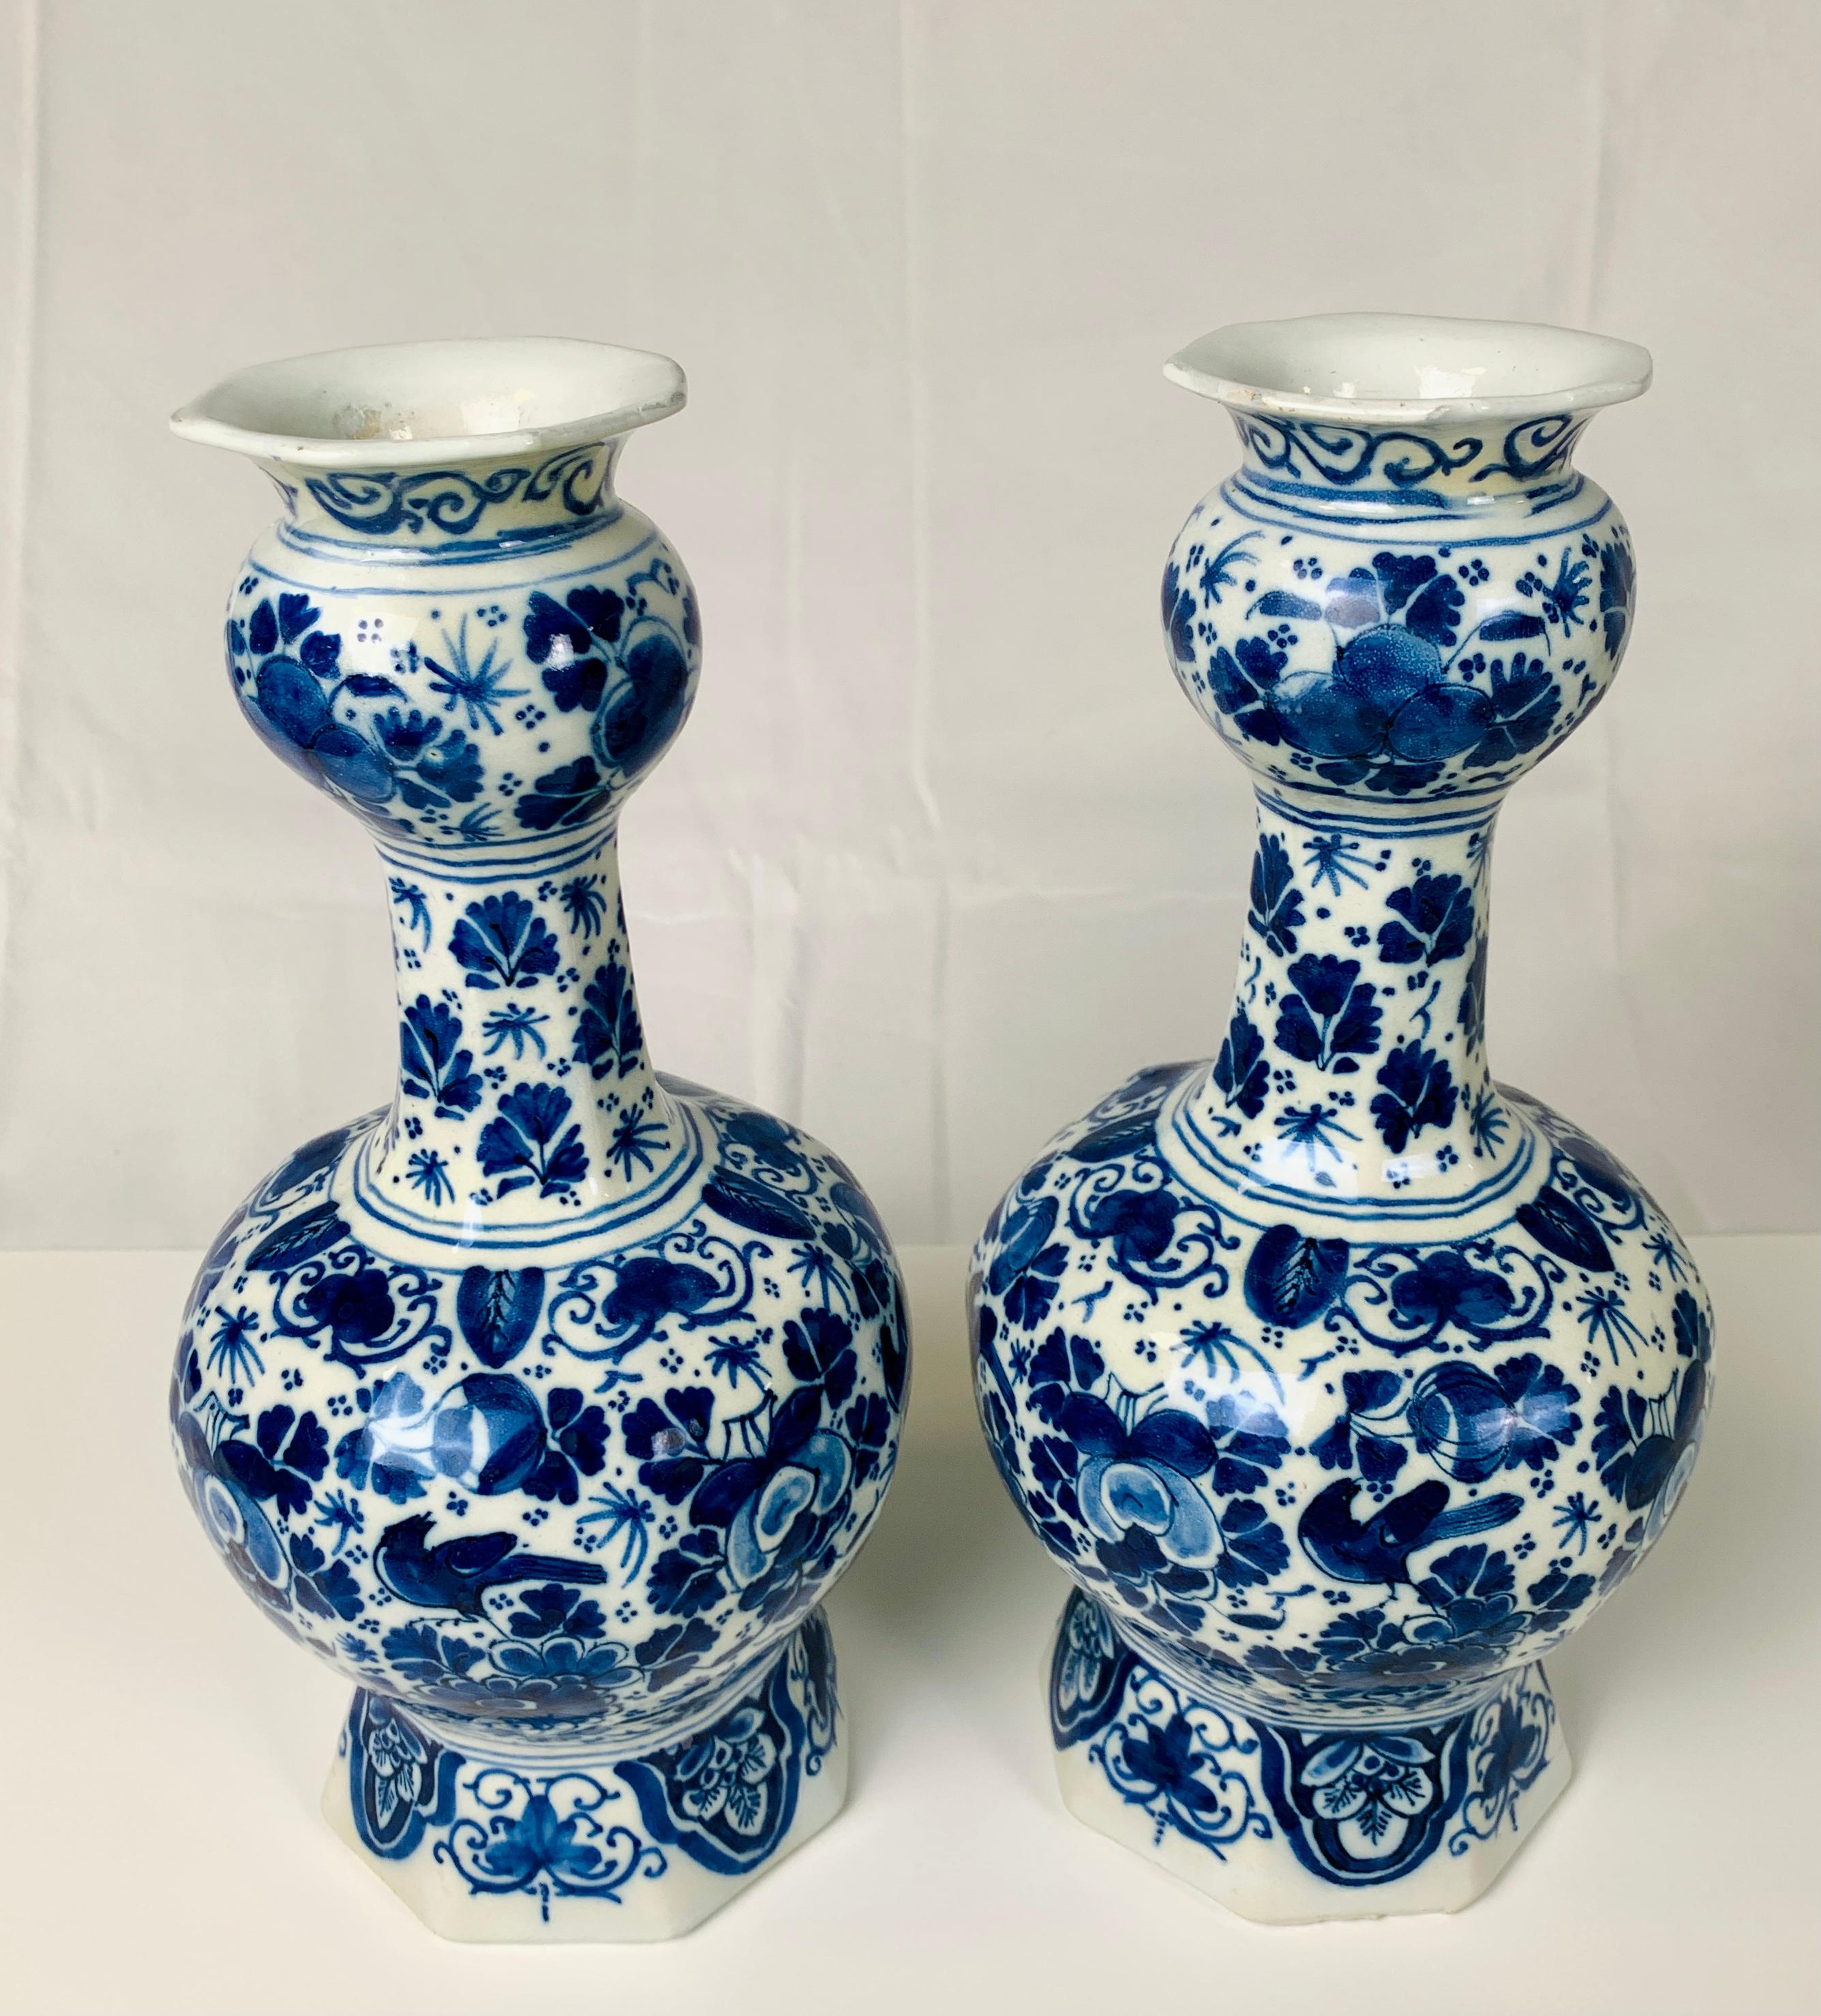 This pair of blue and white Dutch Delft vases was hand-painted in cobalt blue. 
The exquisite blue decoration features an all-around scene in the 